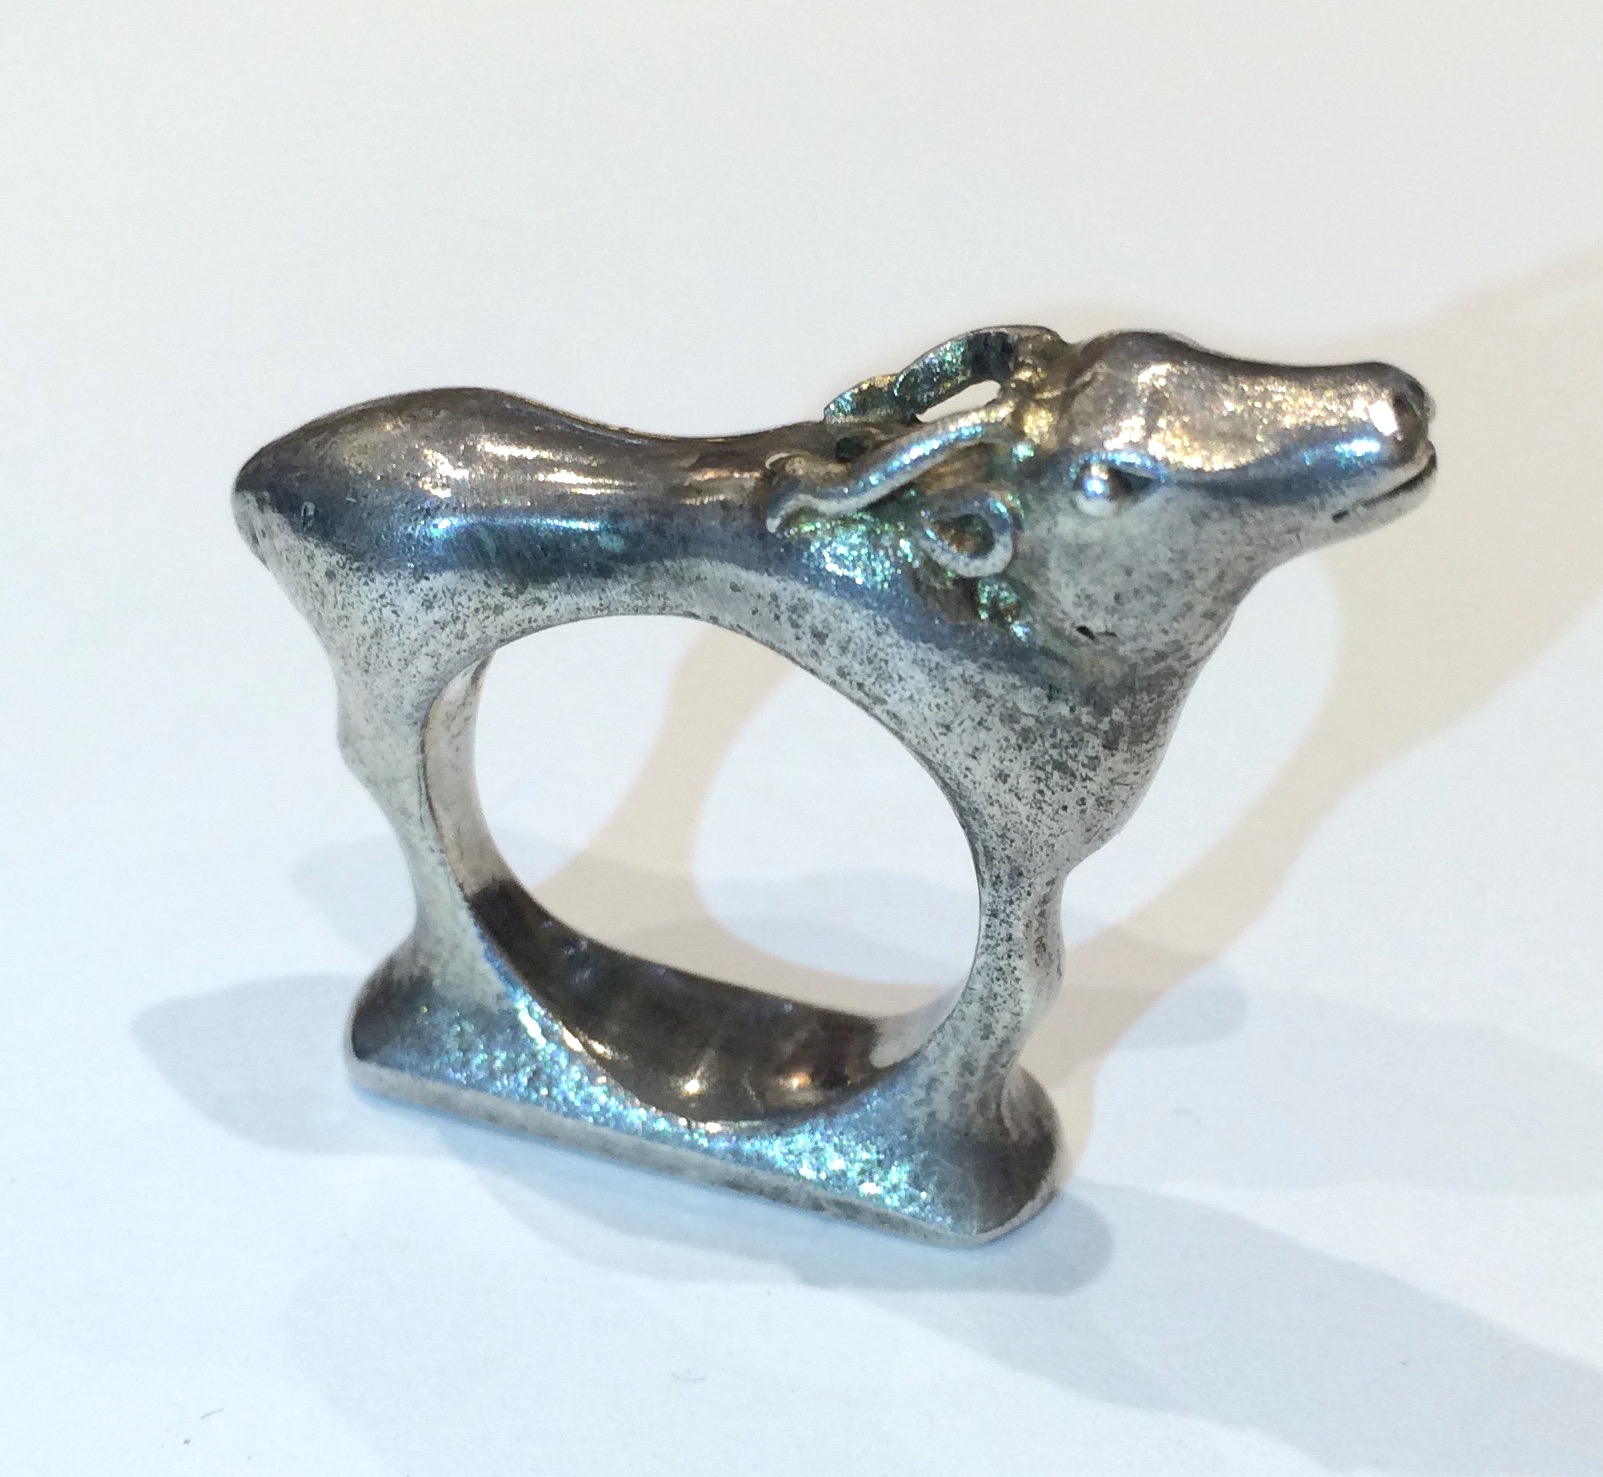 Moshe Oved (1883-1958) “Mountain Deer” ring, hand tooled lost wax silver casting in full dimension and set with gold antlers c.1940